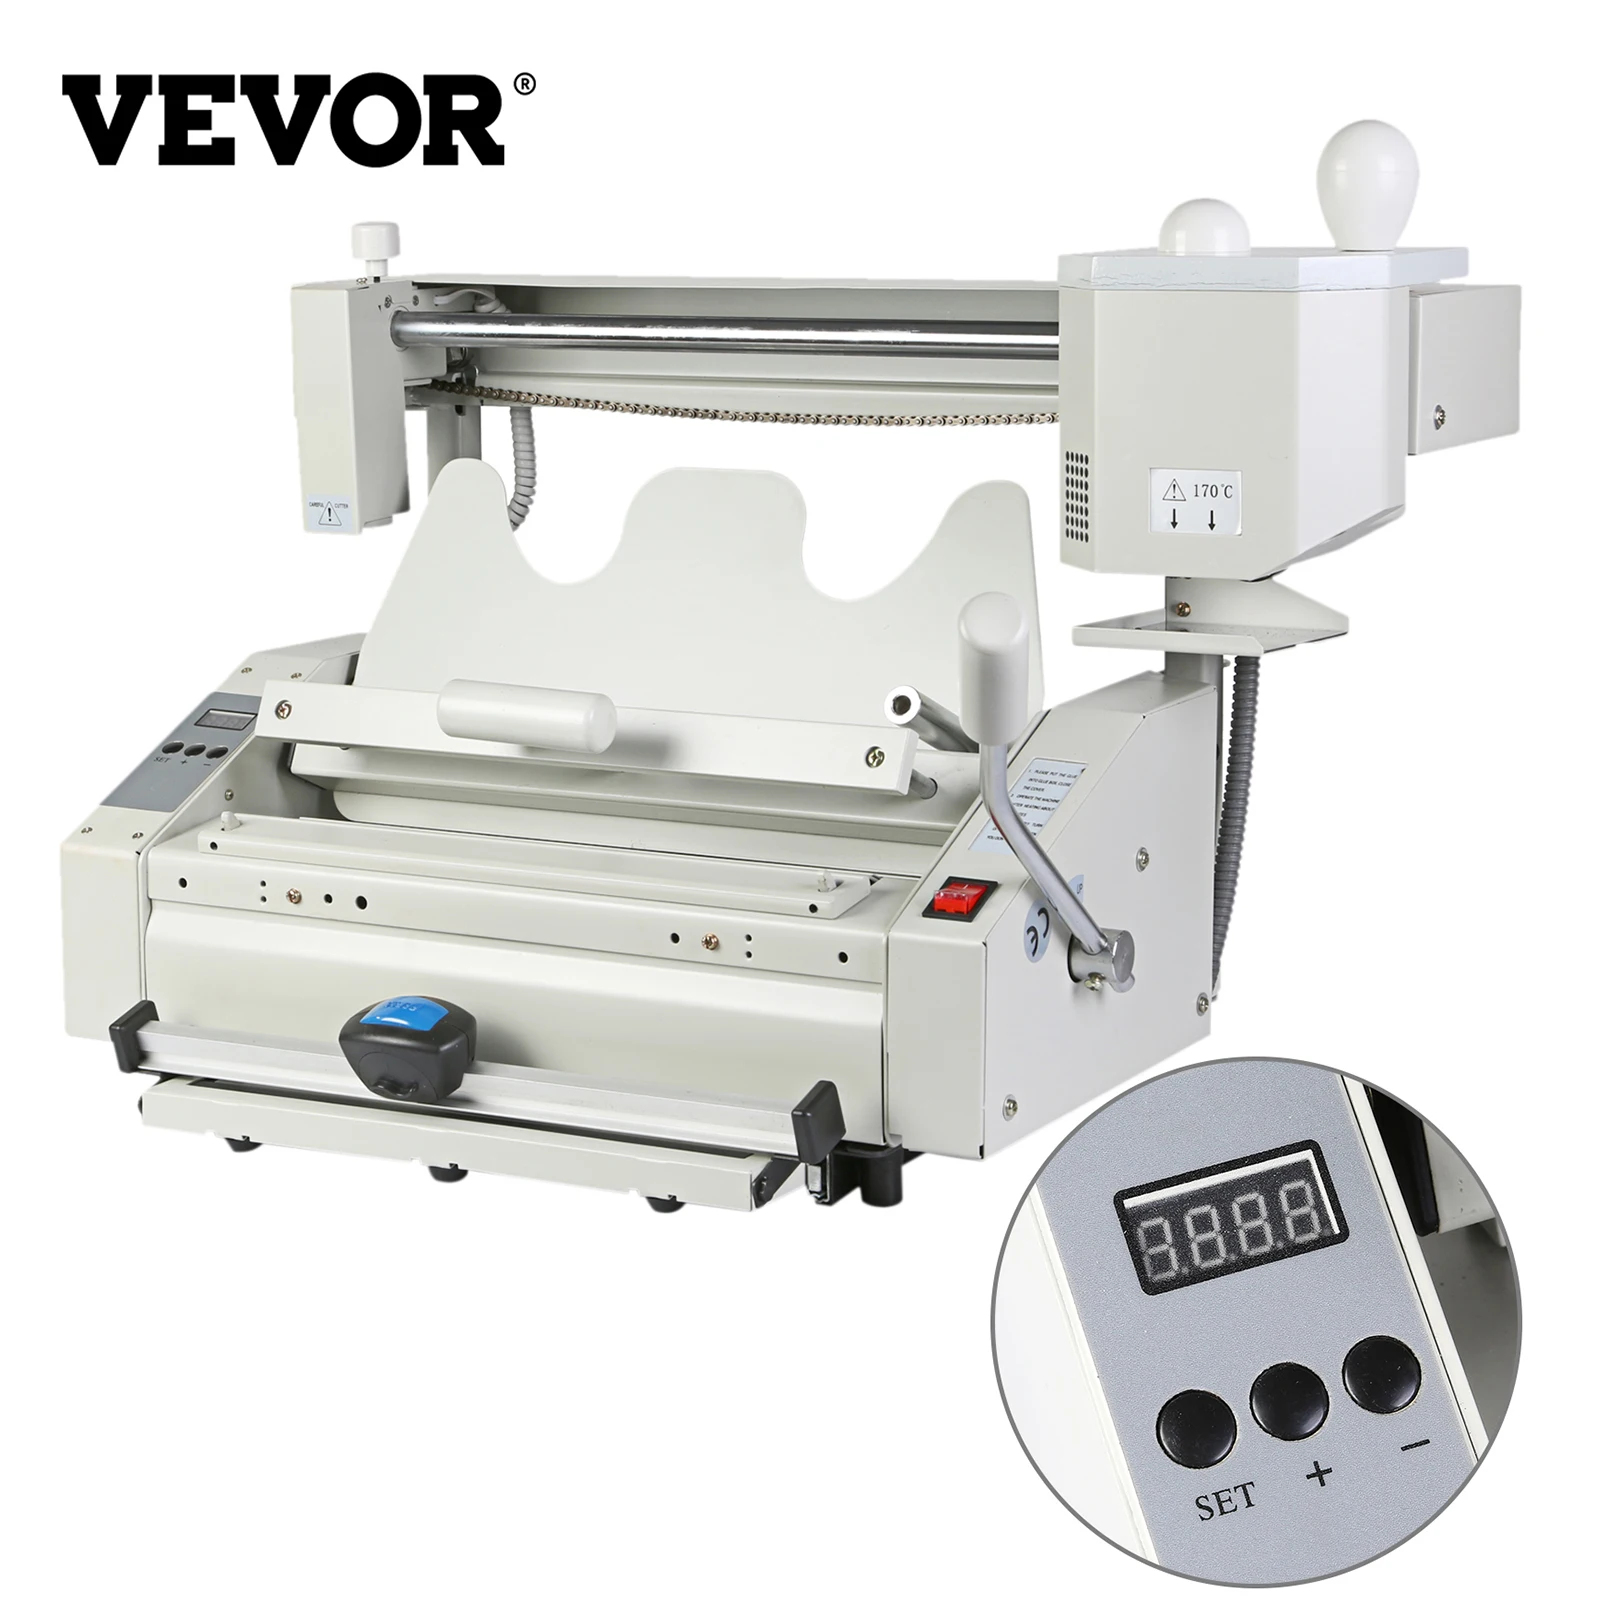 

VEVOR 4in1 2" Thickness 160Books/H Melt Glue Book Binder Binding Machine for Print Copy Store Office Library Publishing Industry